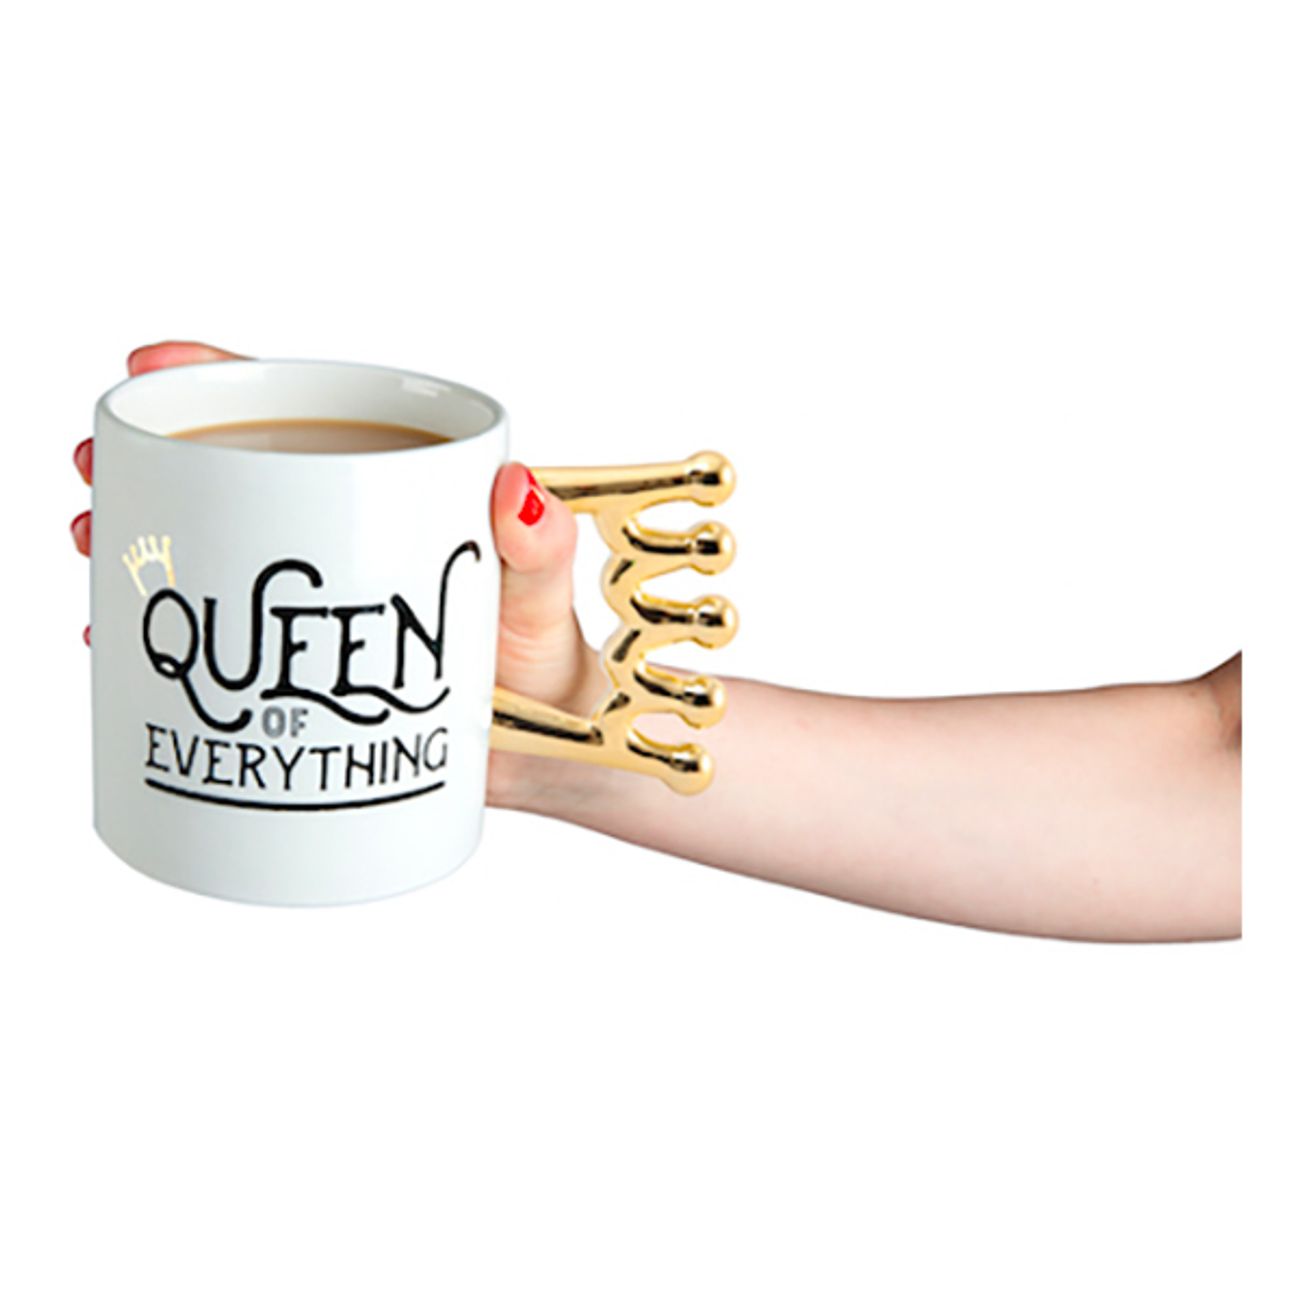 the-queen-of-everything-mugg-2